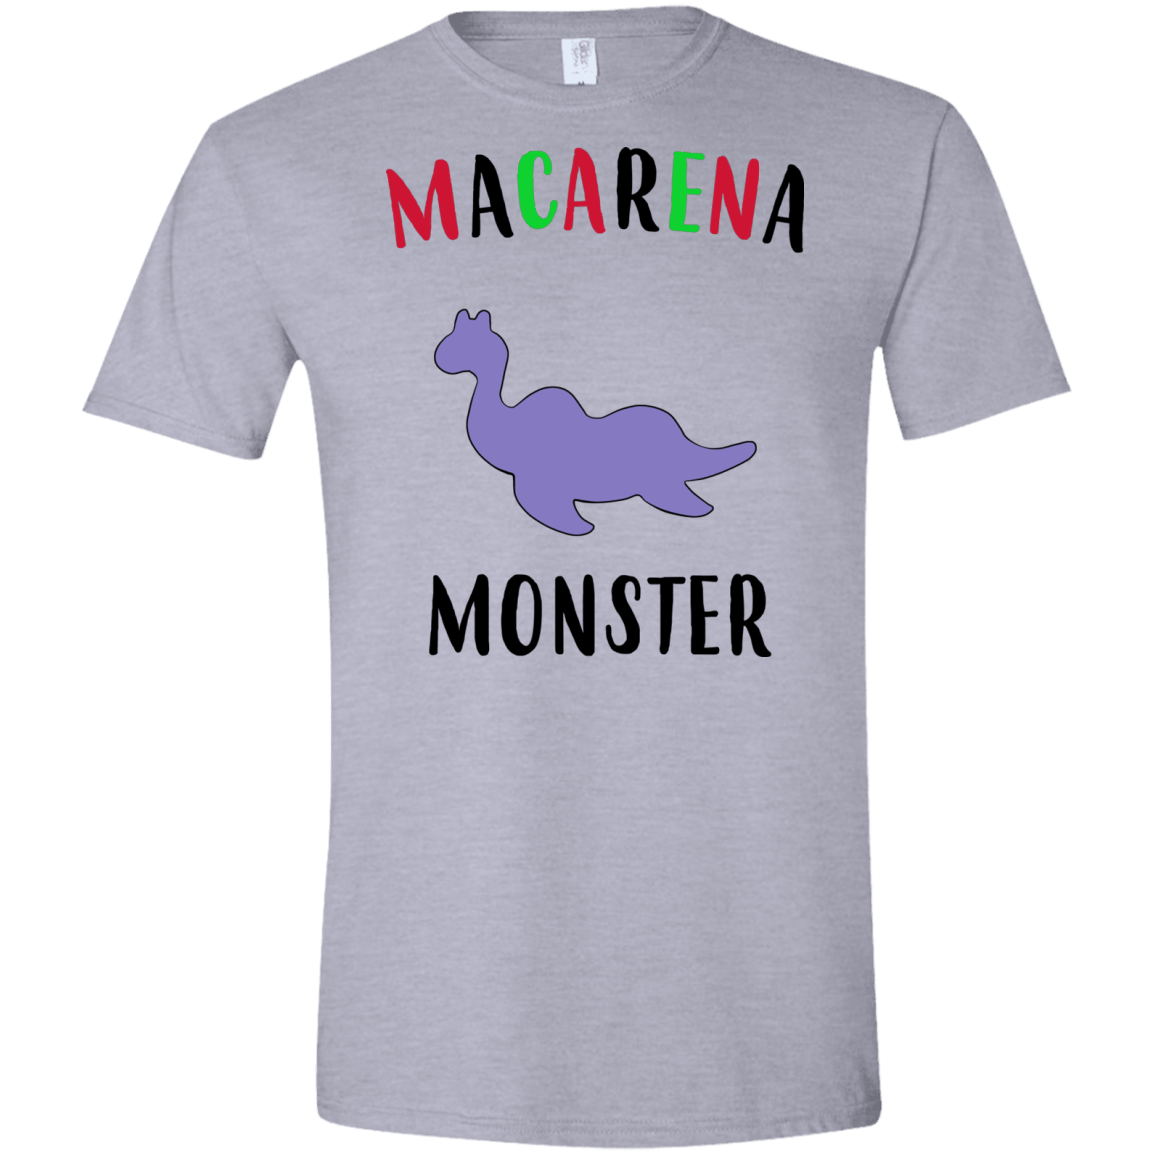 T-Shirts Sport Grey / X-Small Macarena Monster Men's Semi-Fitted Softstyle